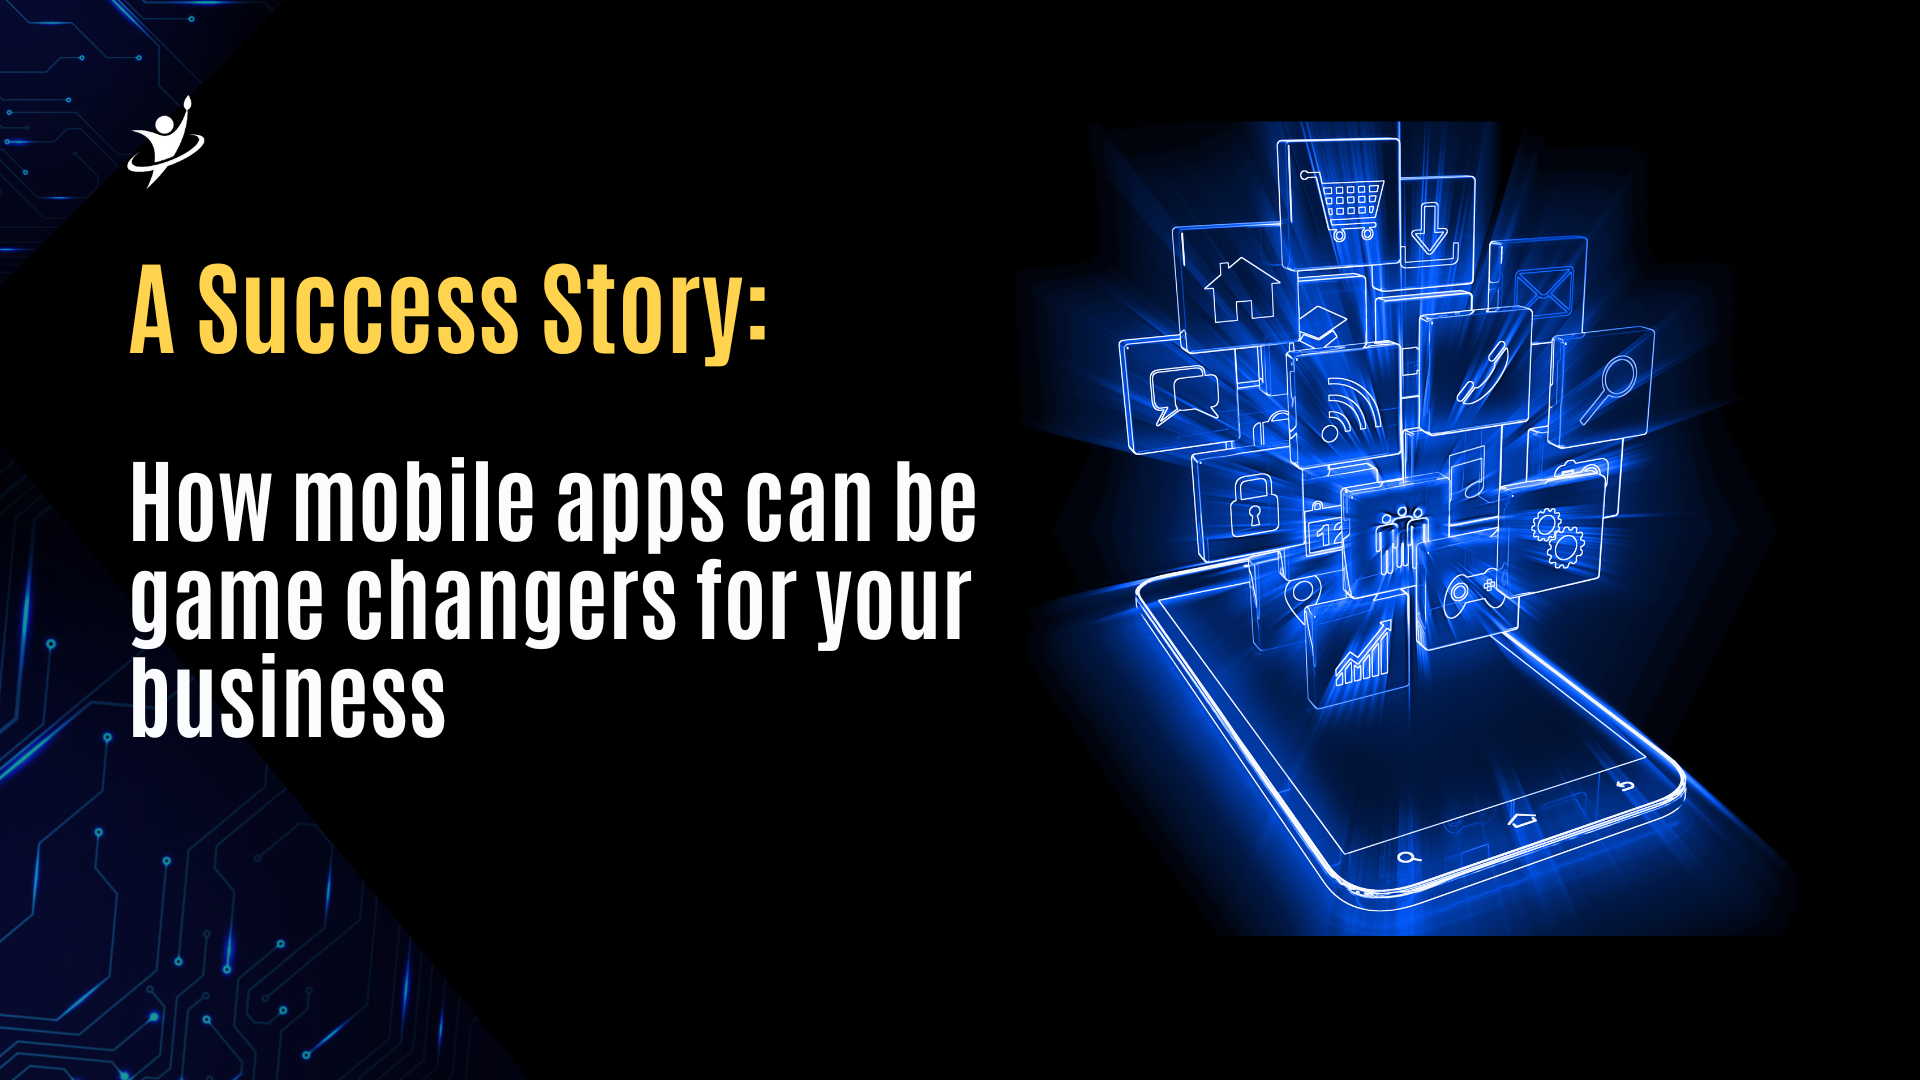 How mobile apps can be game changers for your business